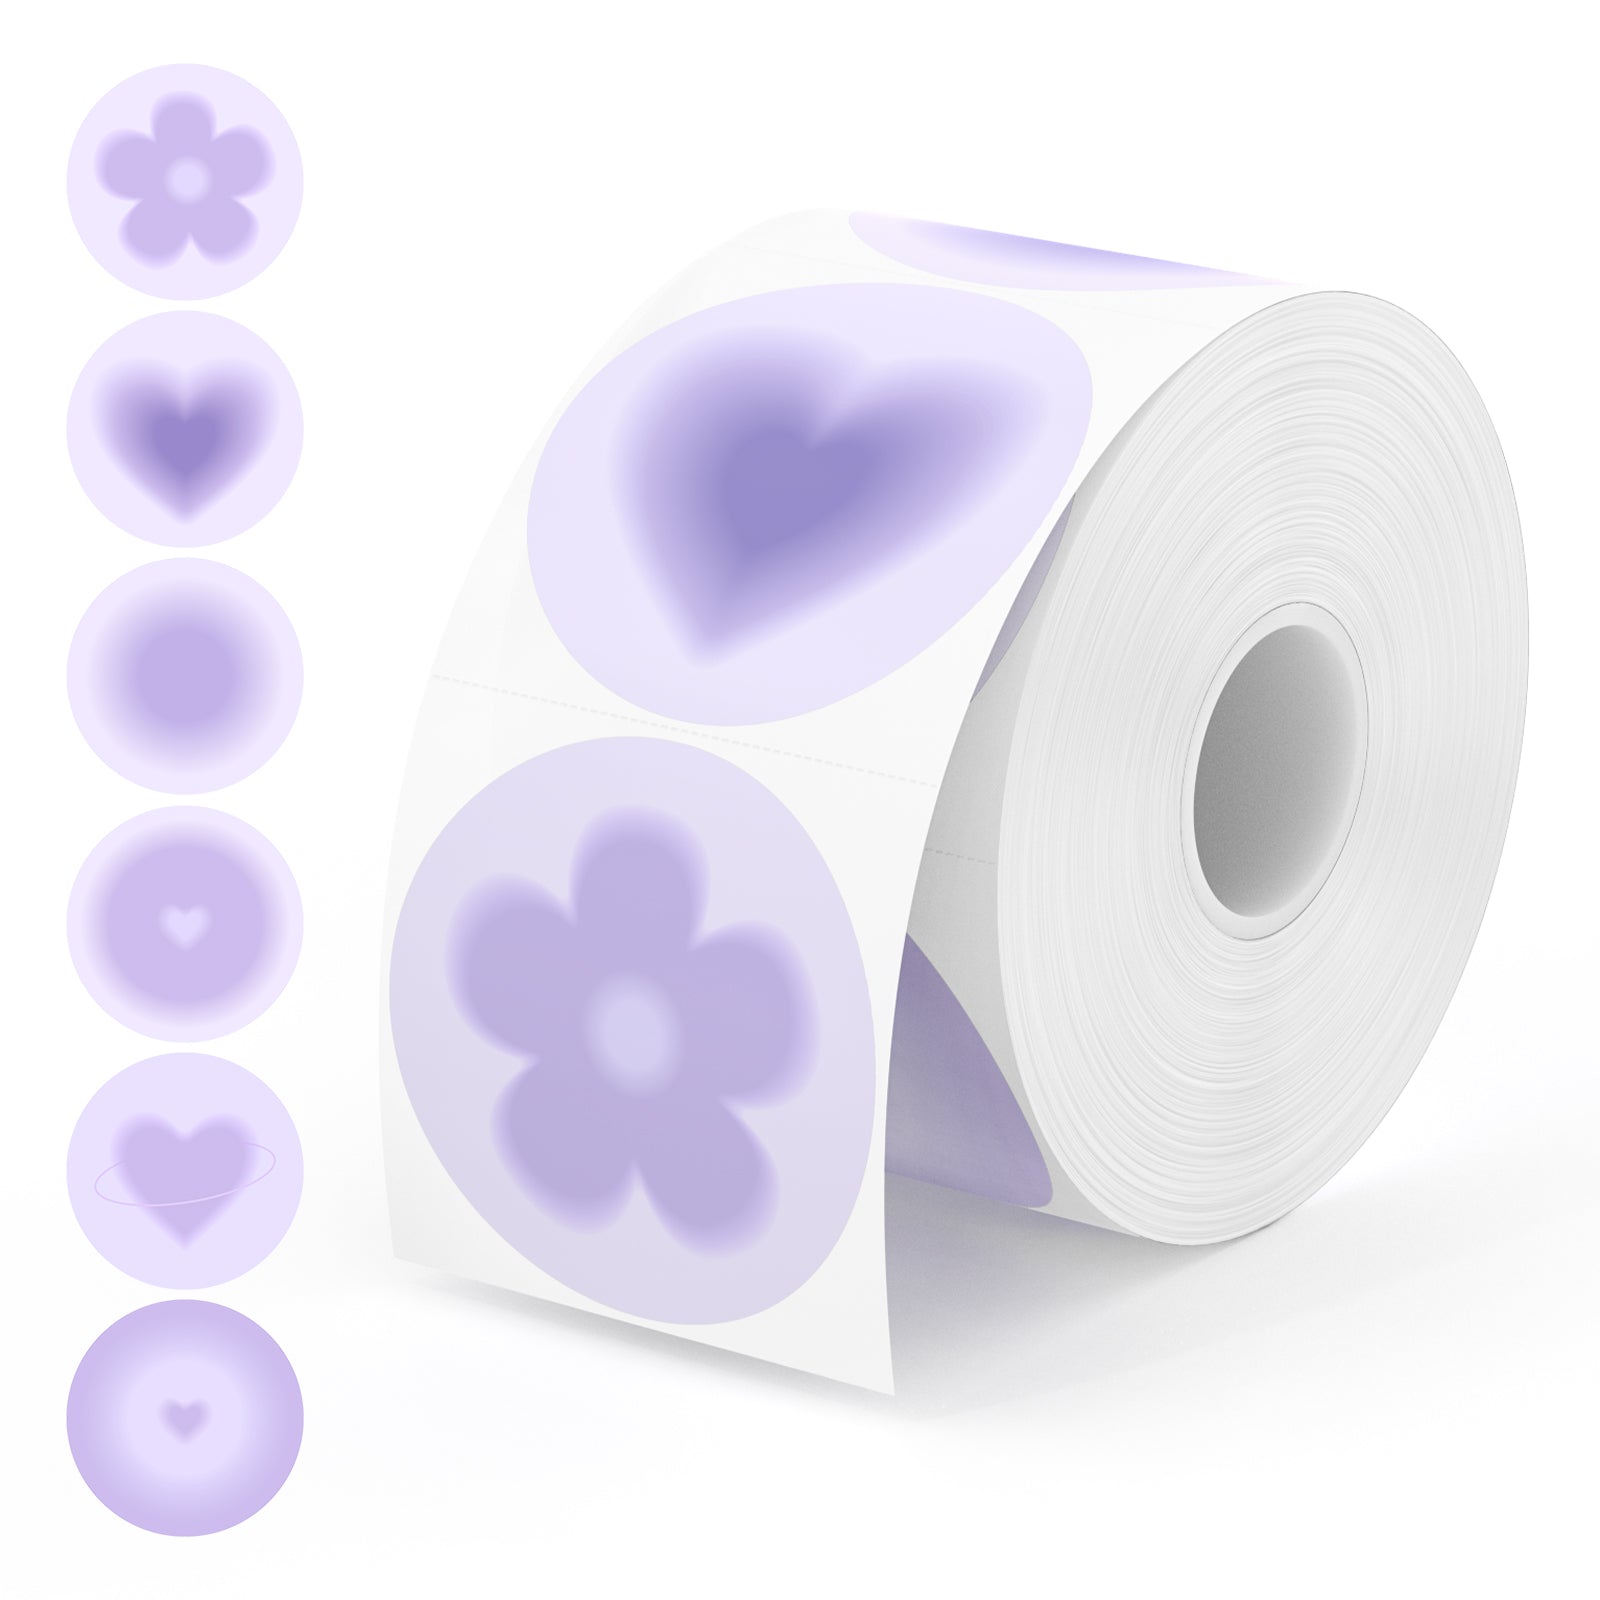 Each roll features six charming purple patterns, giving you a variety of options .